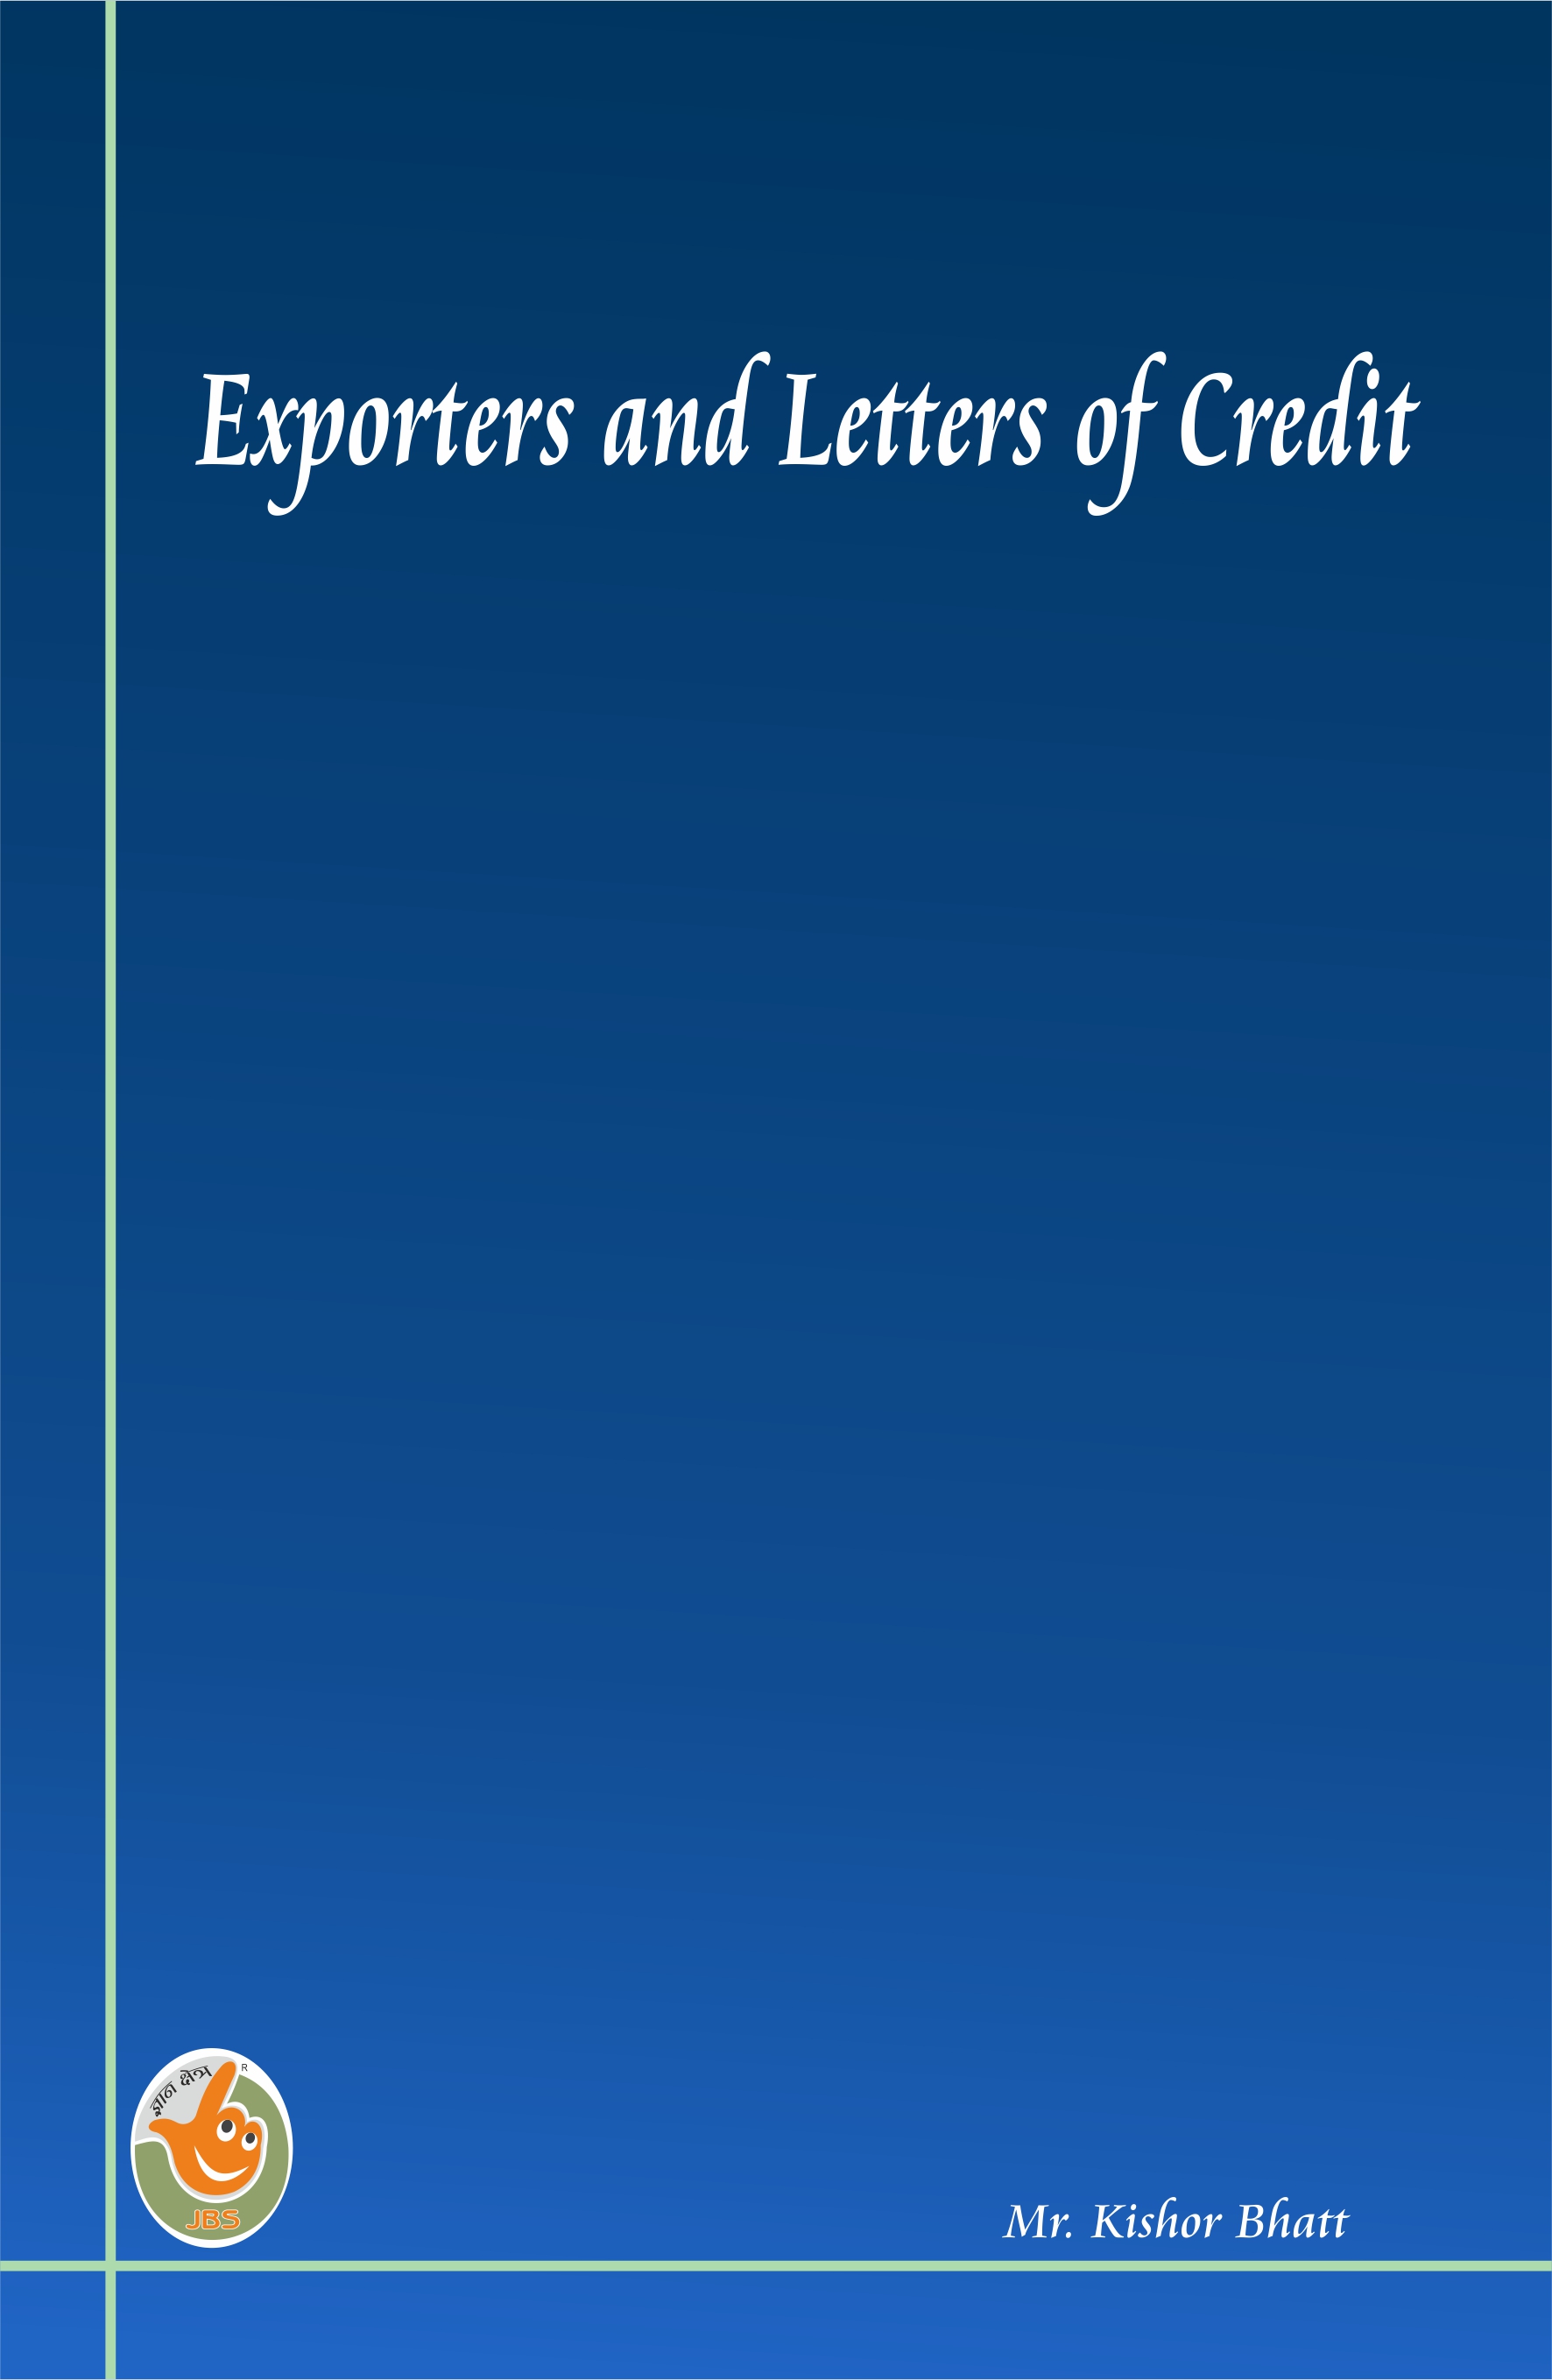 Exporters and Letters of Credit